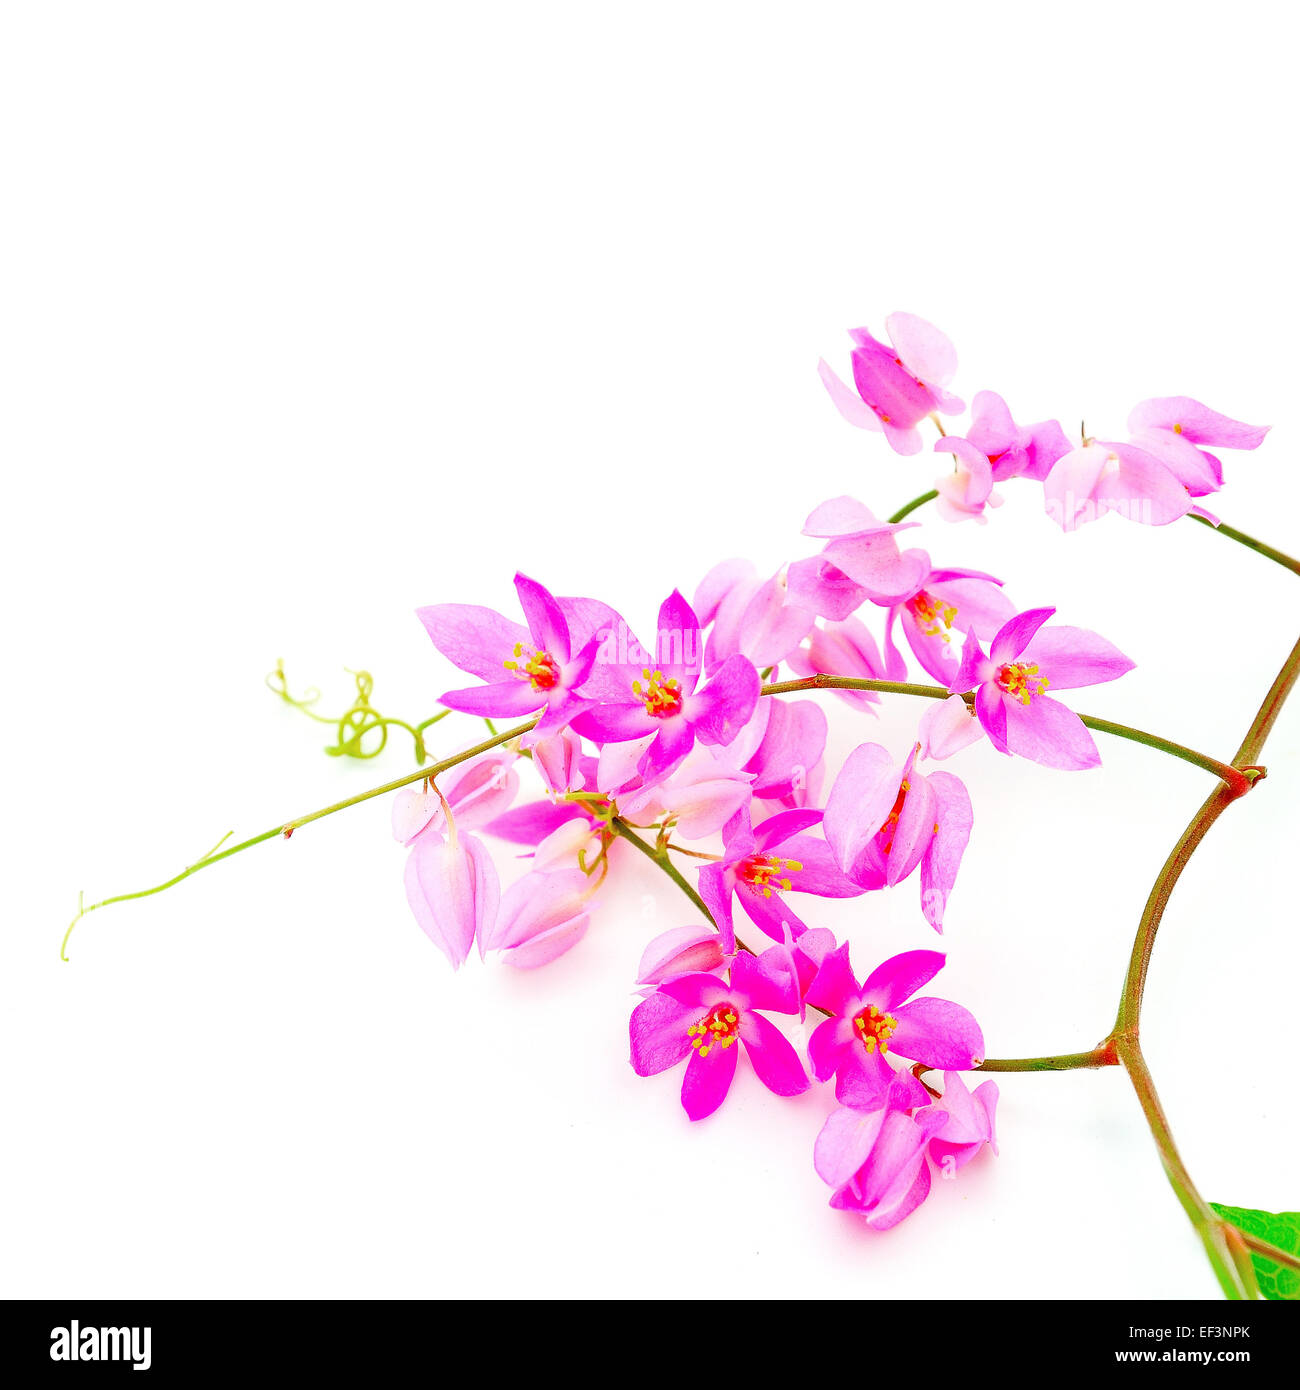 Beautiful pink flower, Coral Vine or Mexican Creeper (Antigonon leptopus), isolated on a white background Stock Photo